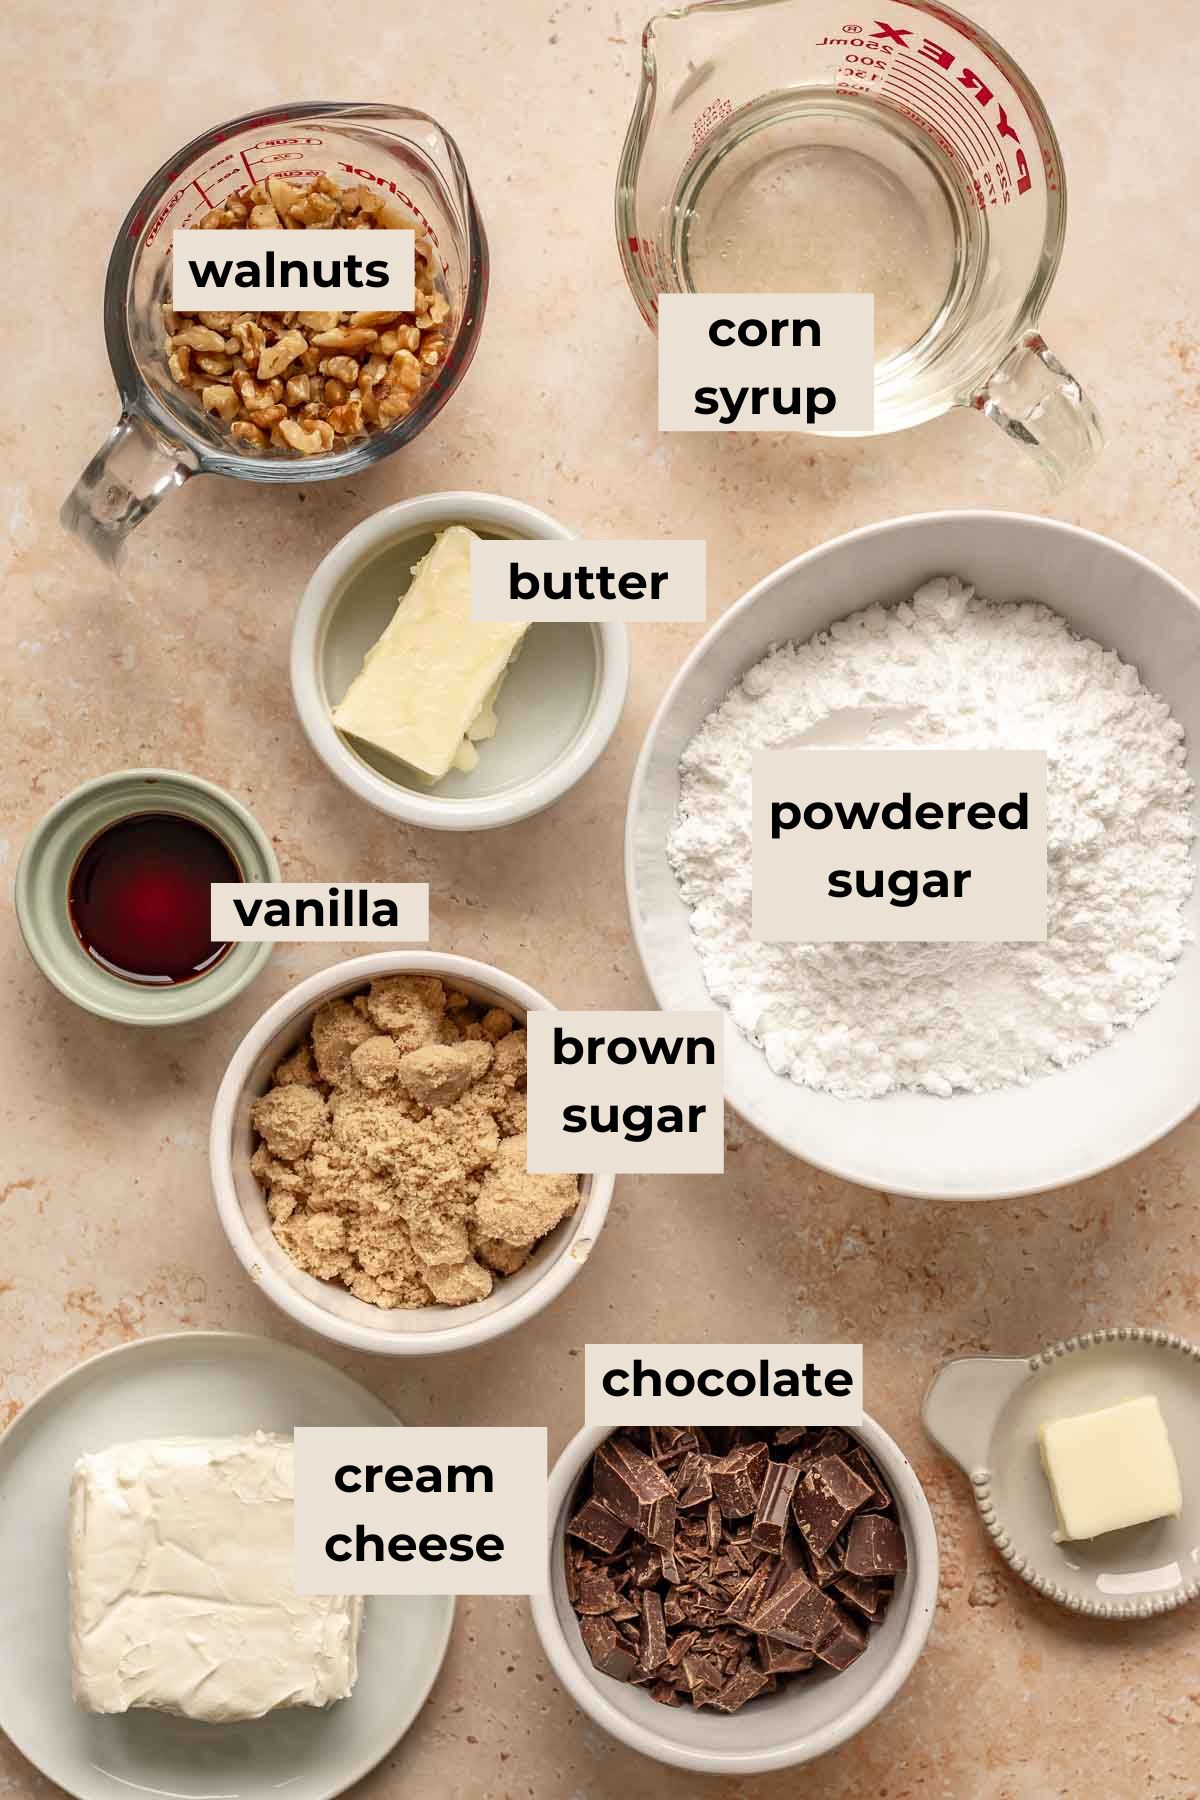 Ingredients for cake filling and frosting.